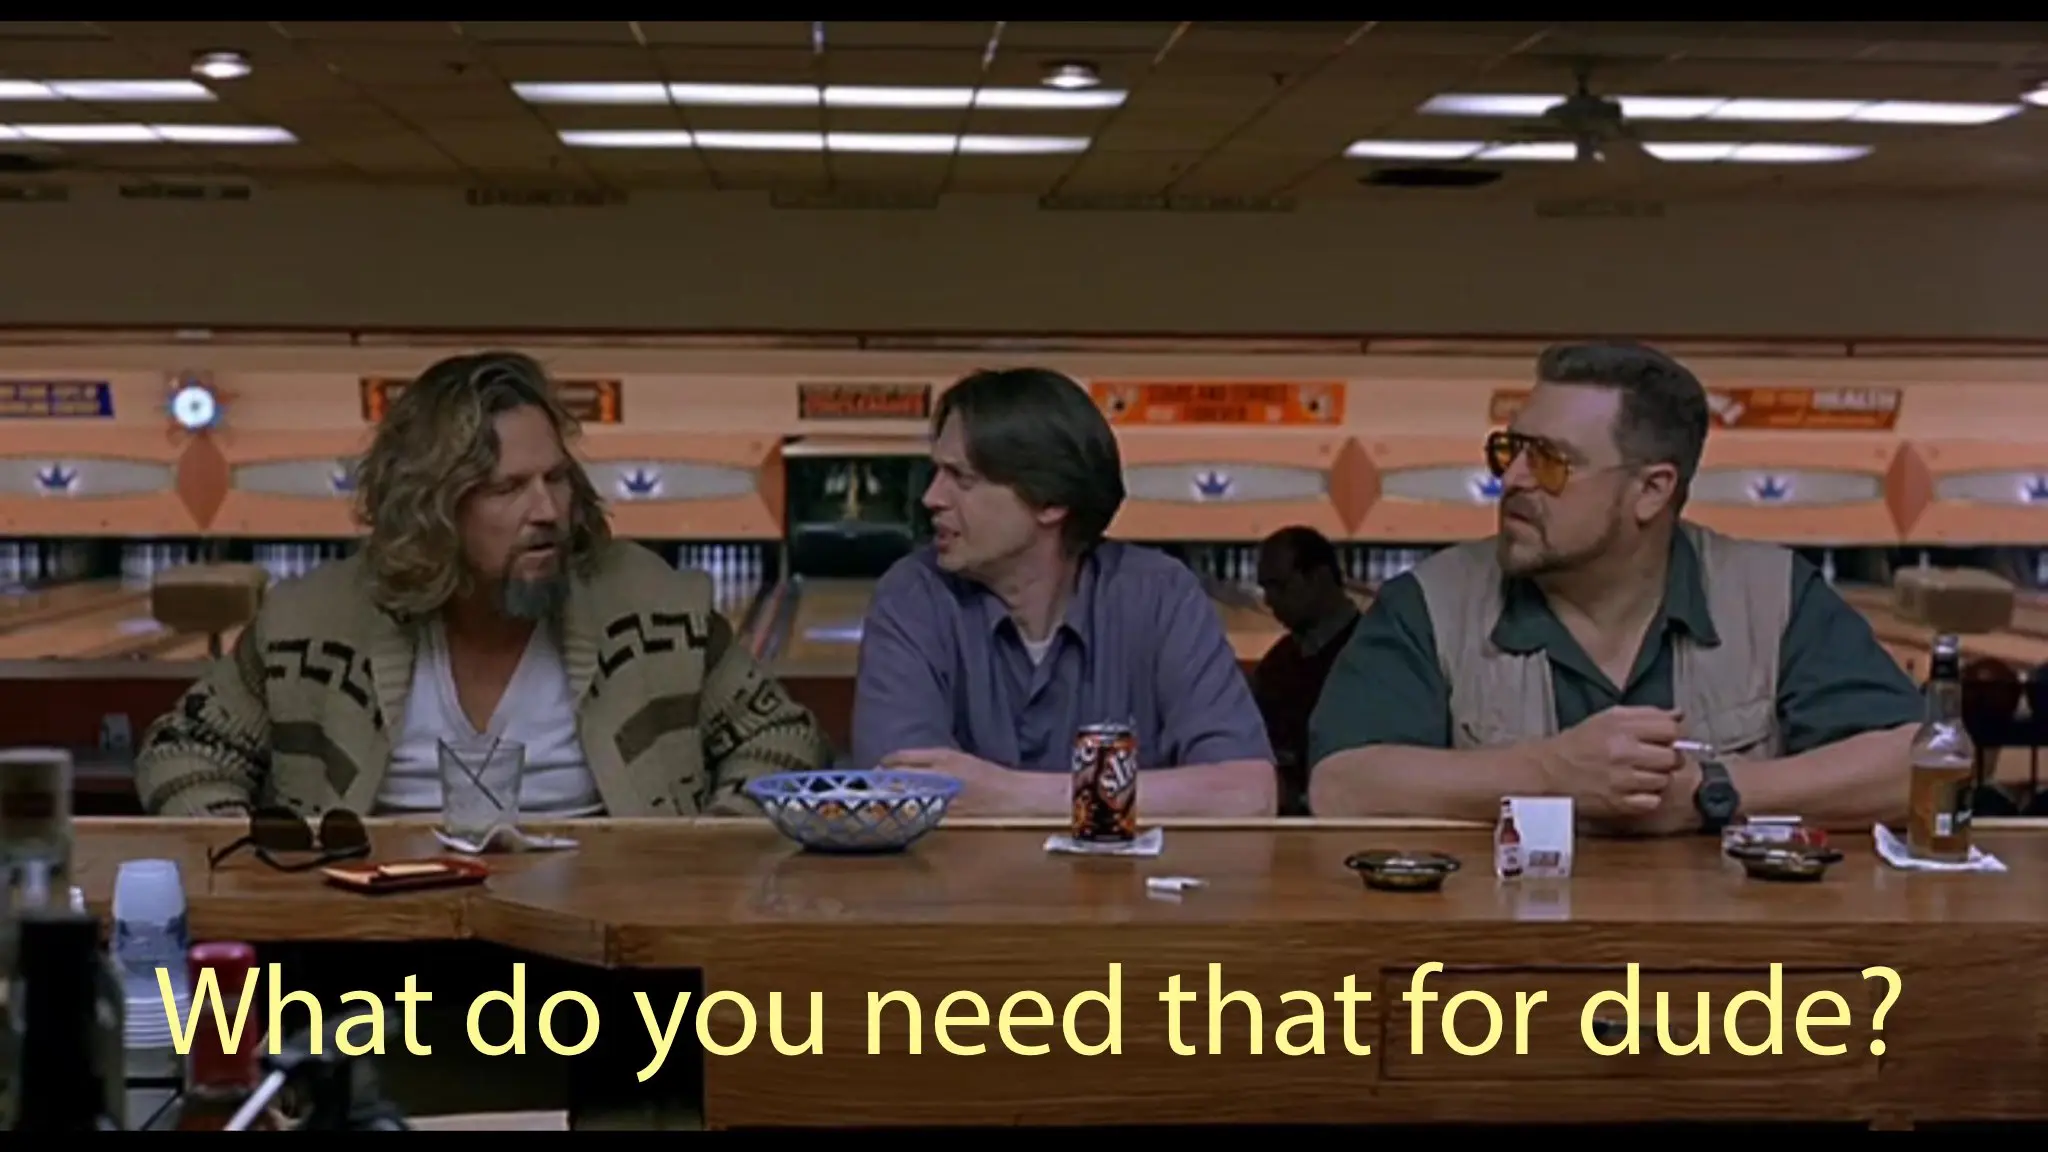 Screengrab from the movie, "The Big Lebowski". The Dude, Donny and Walter sit at the bar in the bowling alley. Text of Donny's dialogue from the scene is overlaid and reads, "What do you need that for dude?"